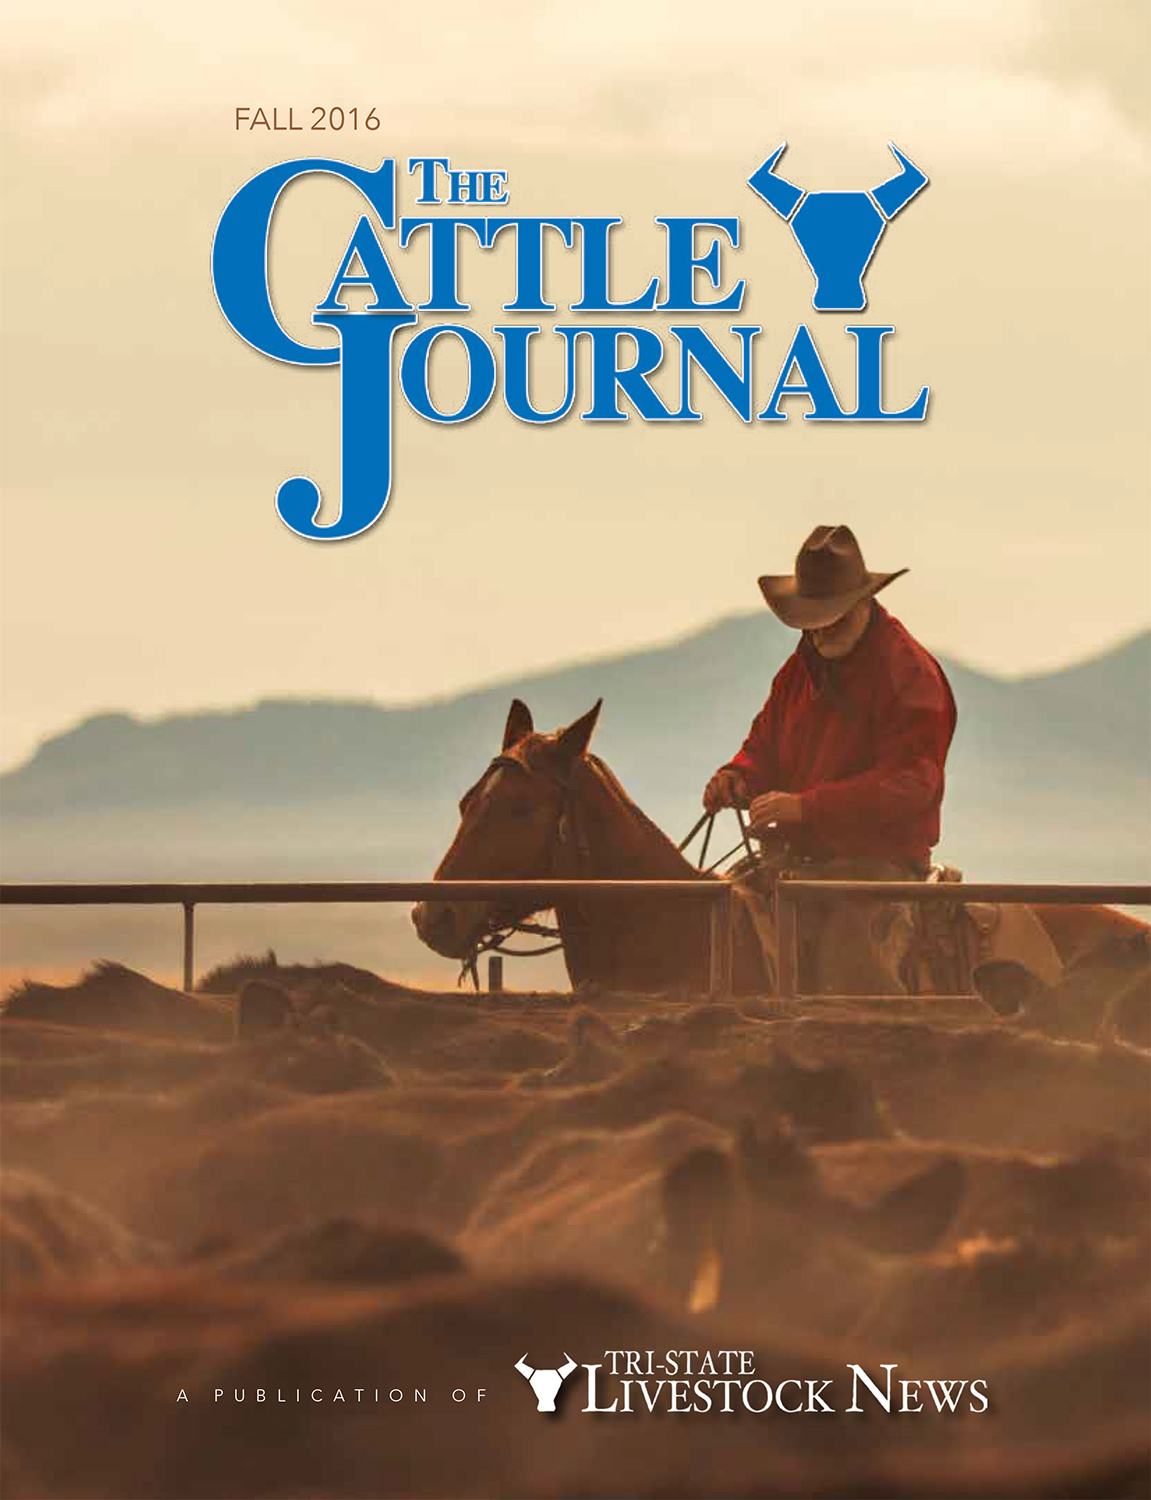 Cowboy photo on cover of The Cattle Journal